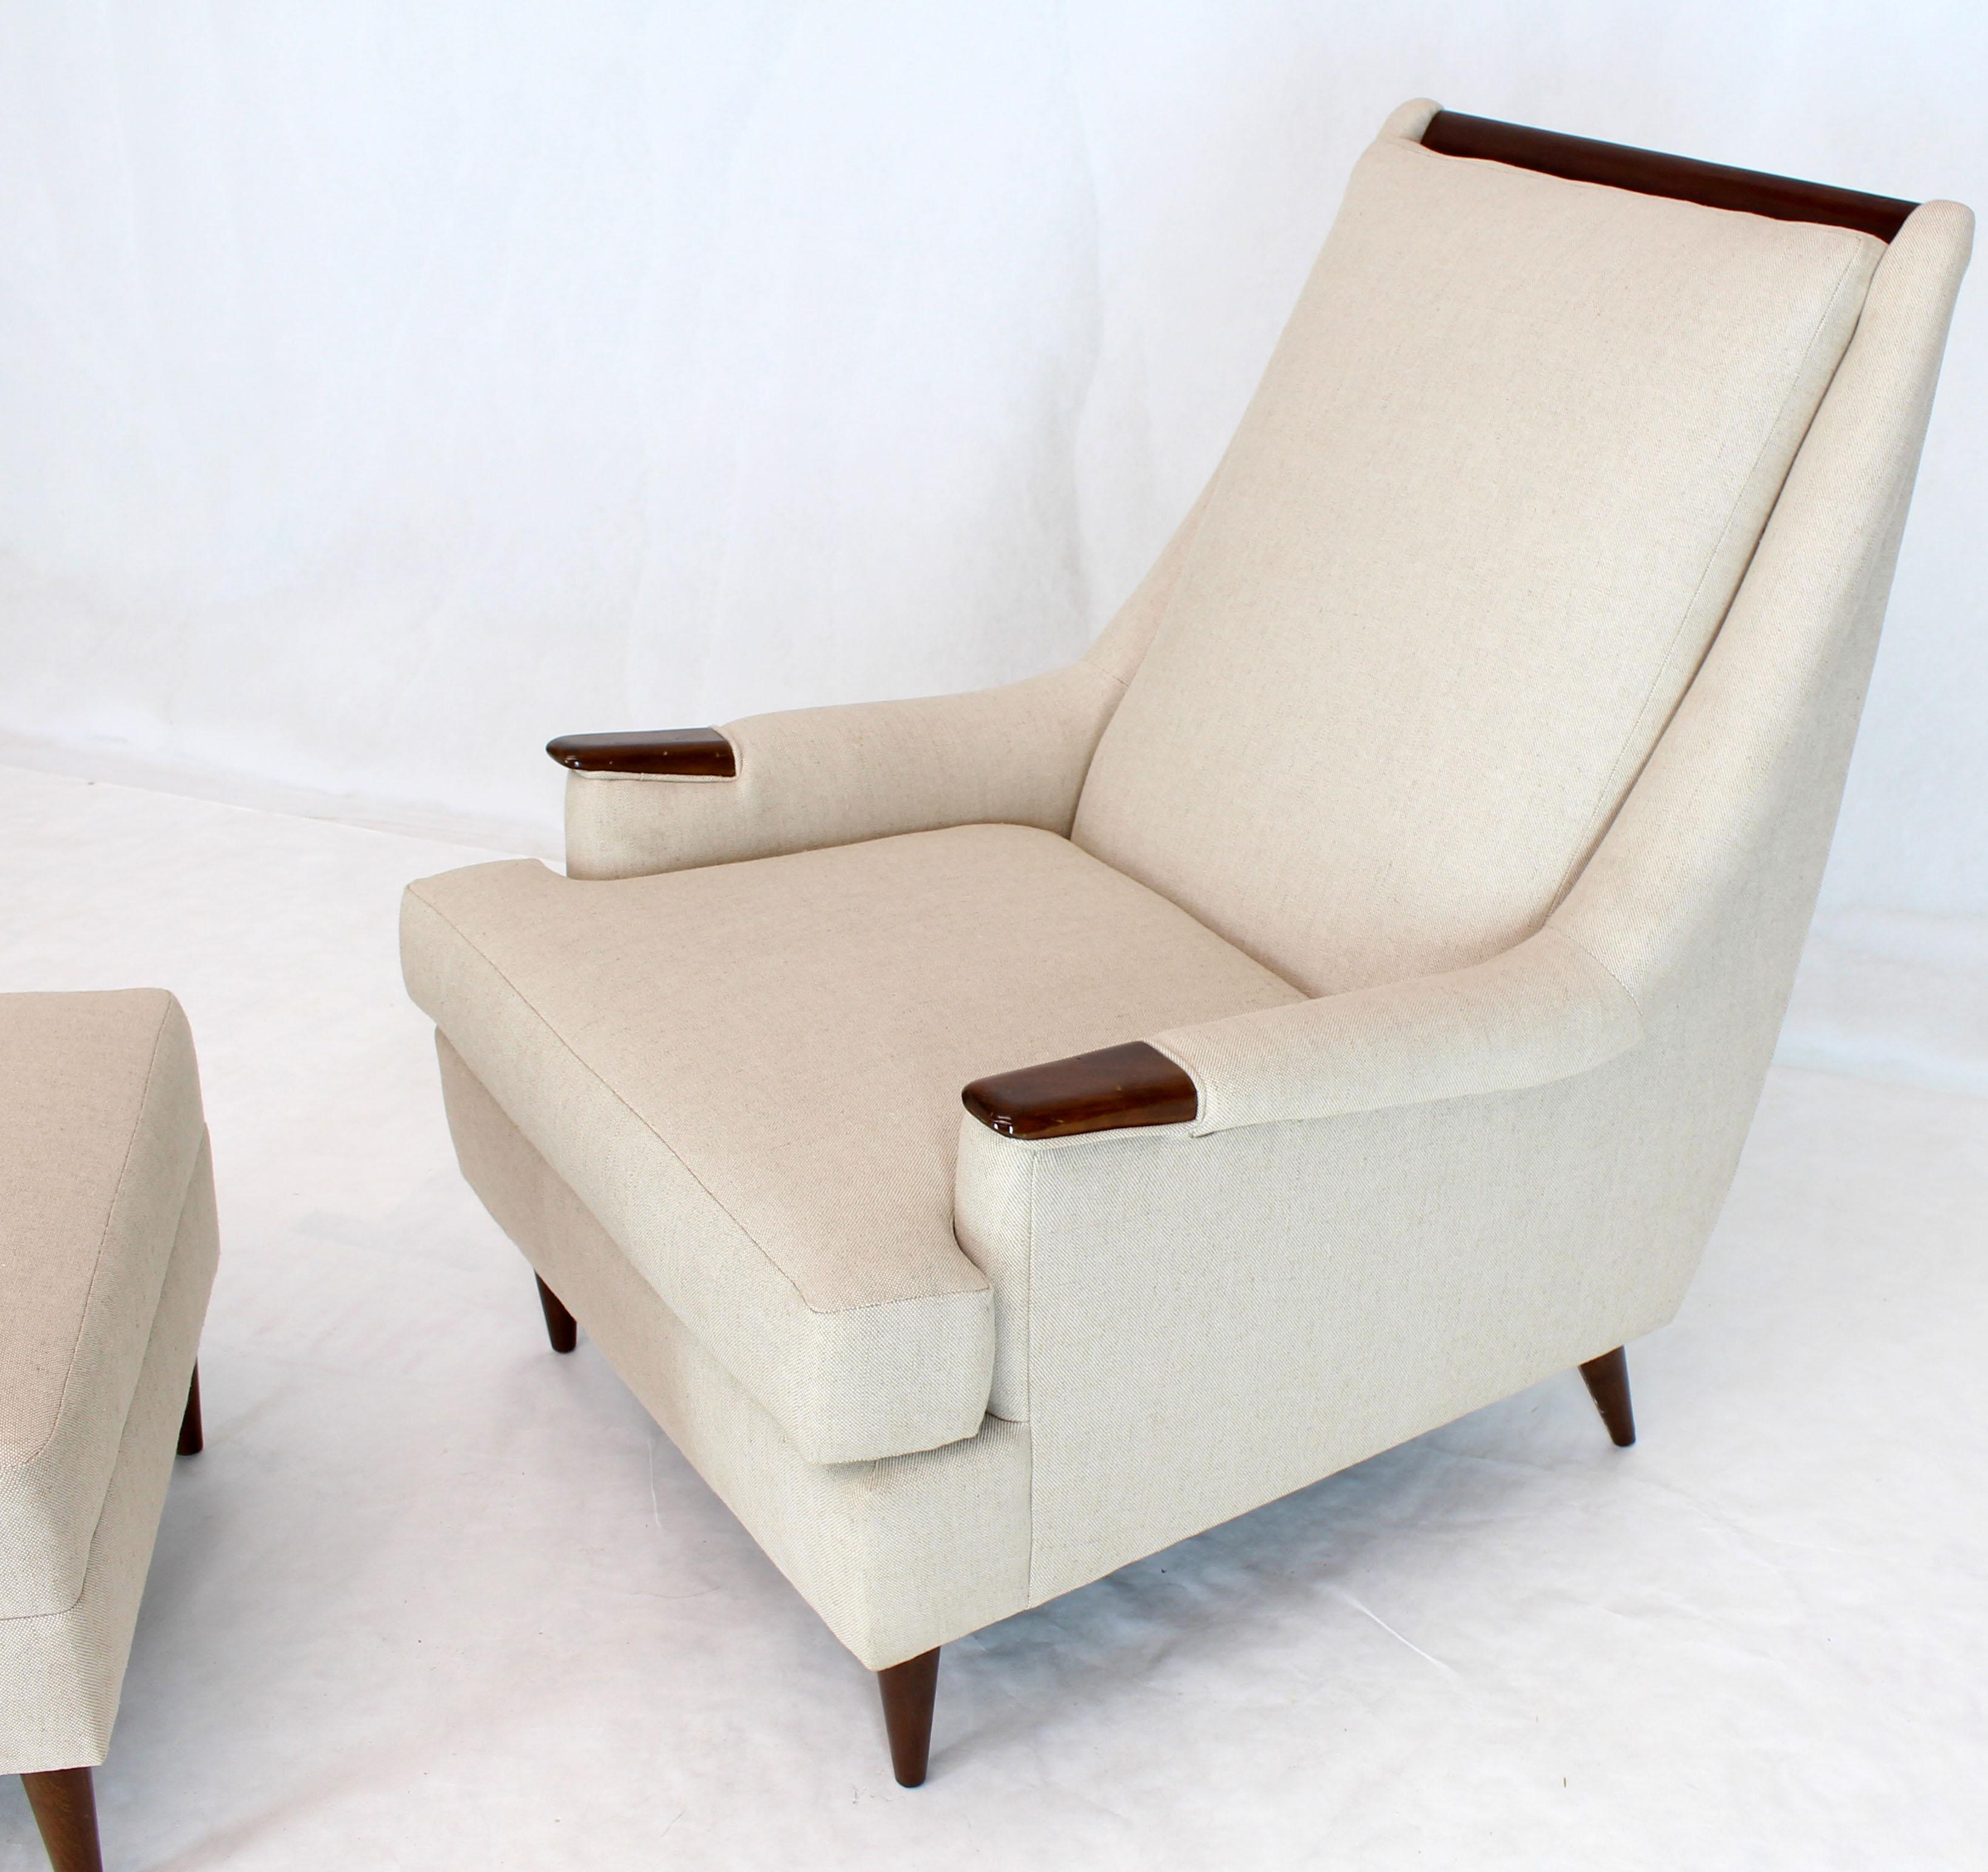 New linen upholstery papa bear style midcentury Danish modern lounge chair with matching footstool. Ottoman measures: 19 x 22 x 15.